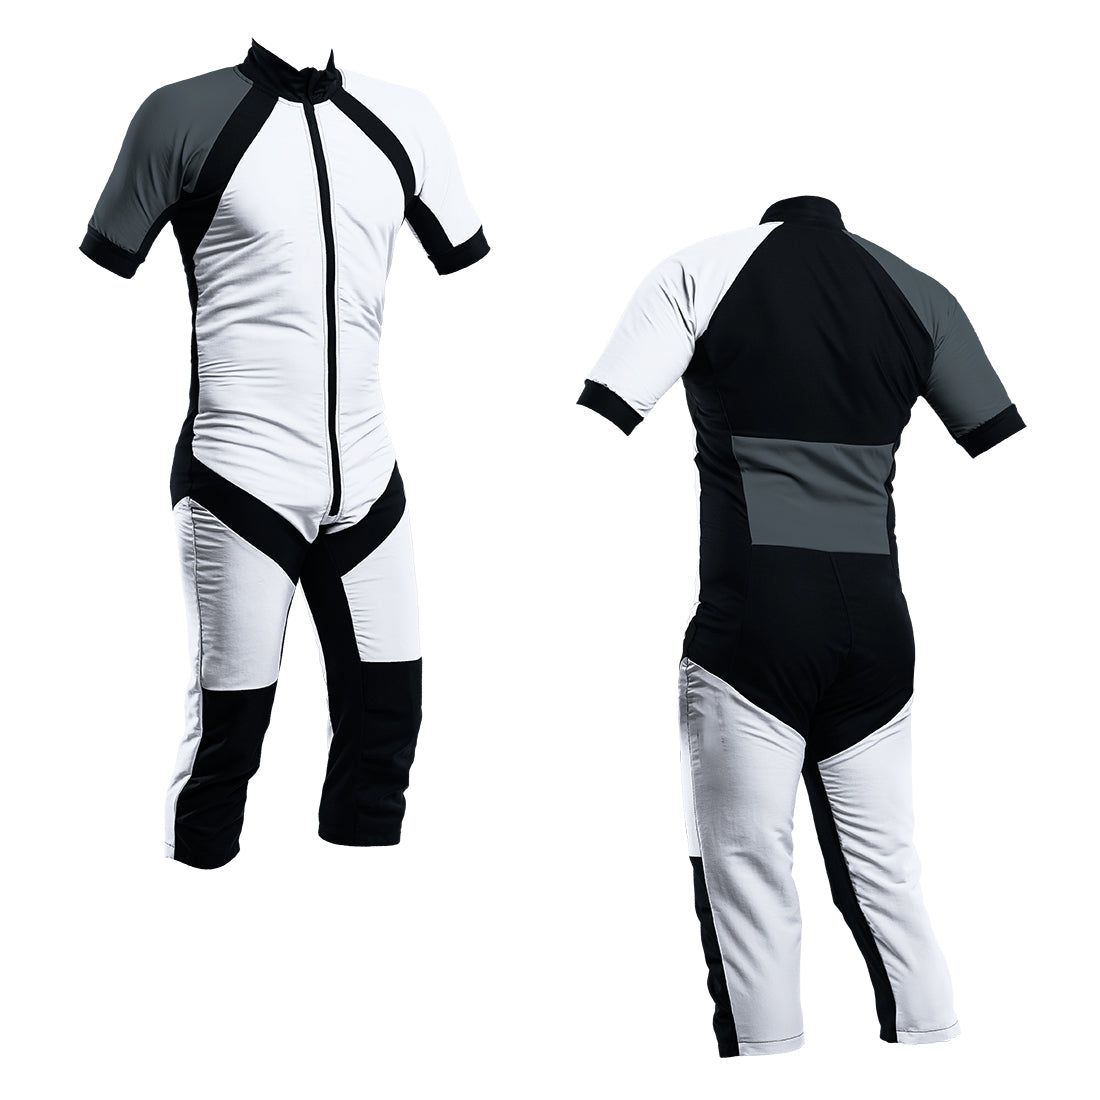 Skydiving Summer Suit White-Charcoal S2-03